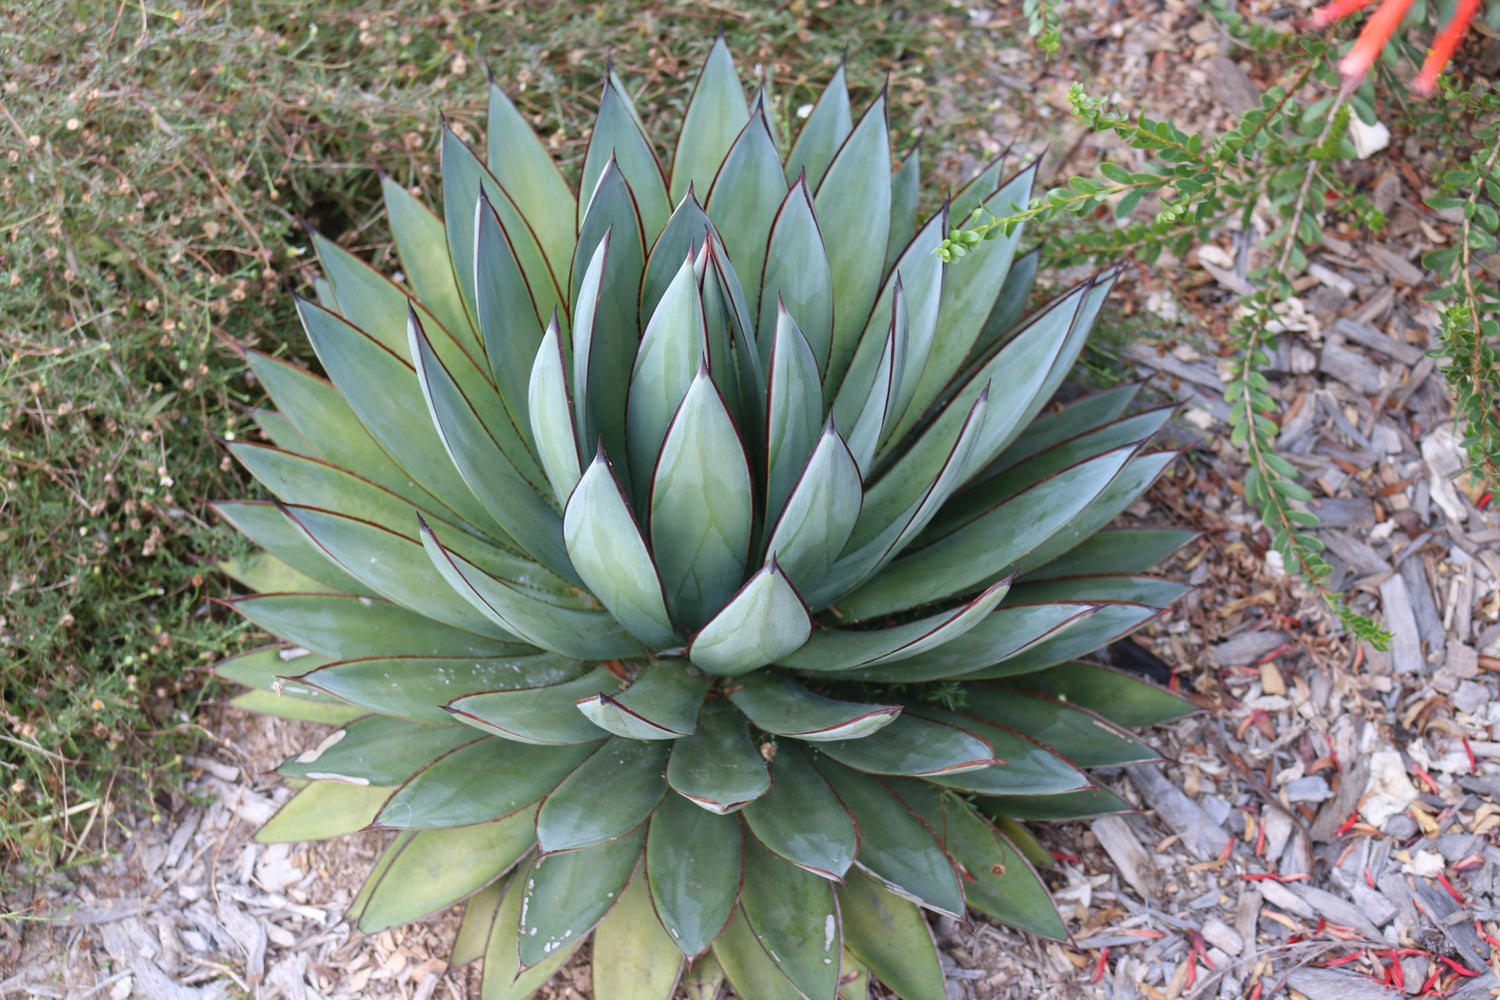 A blue glow agave plant with a vibrant green center.